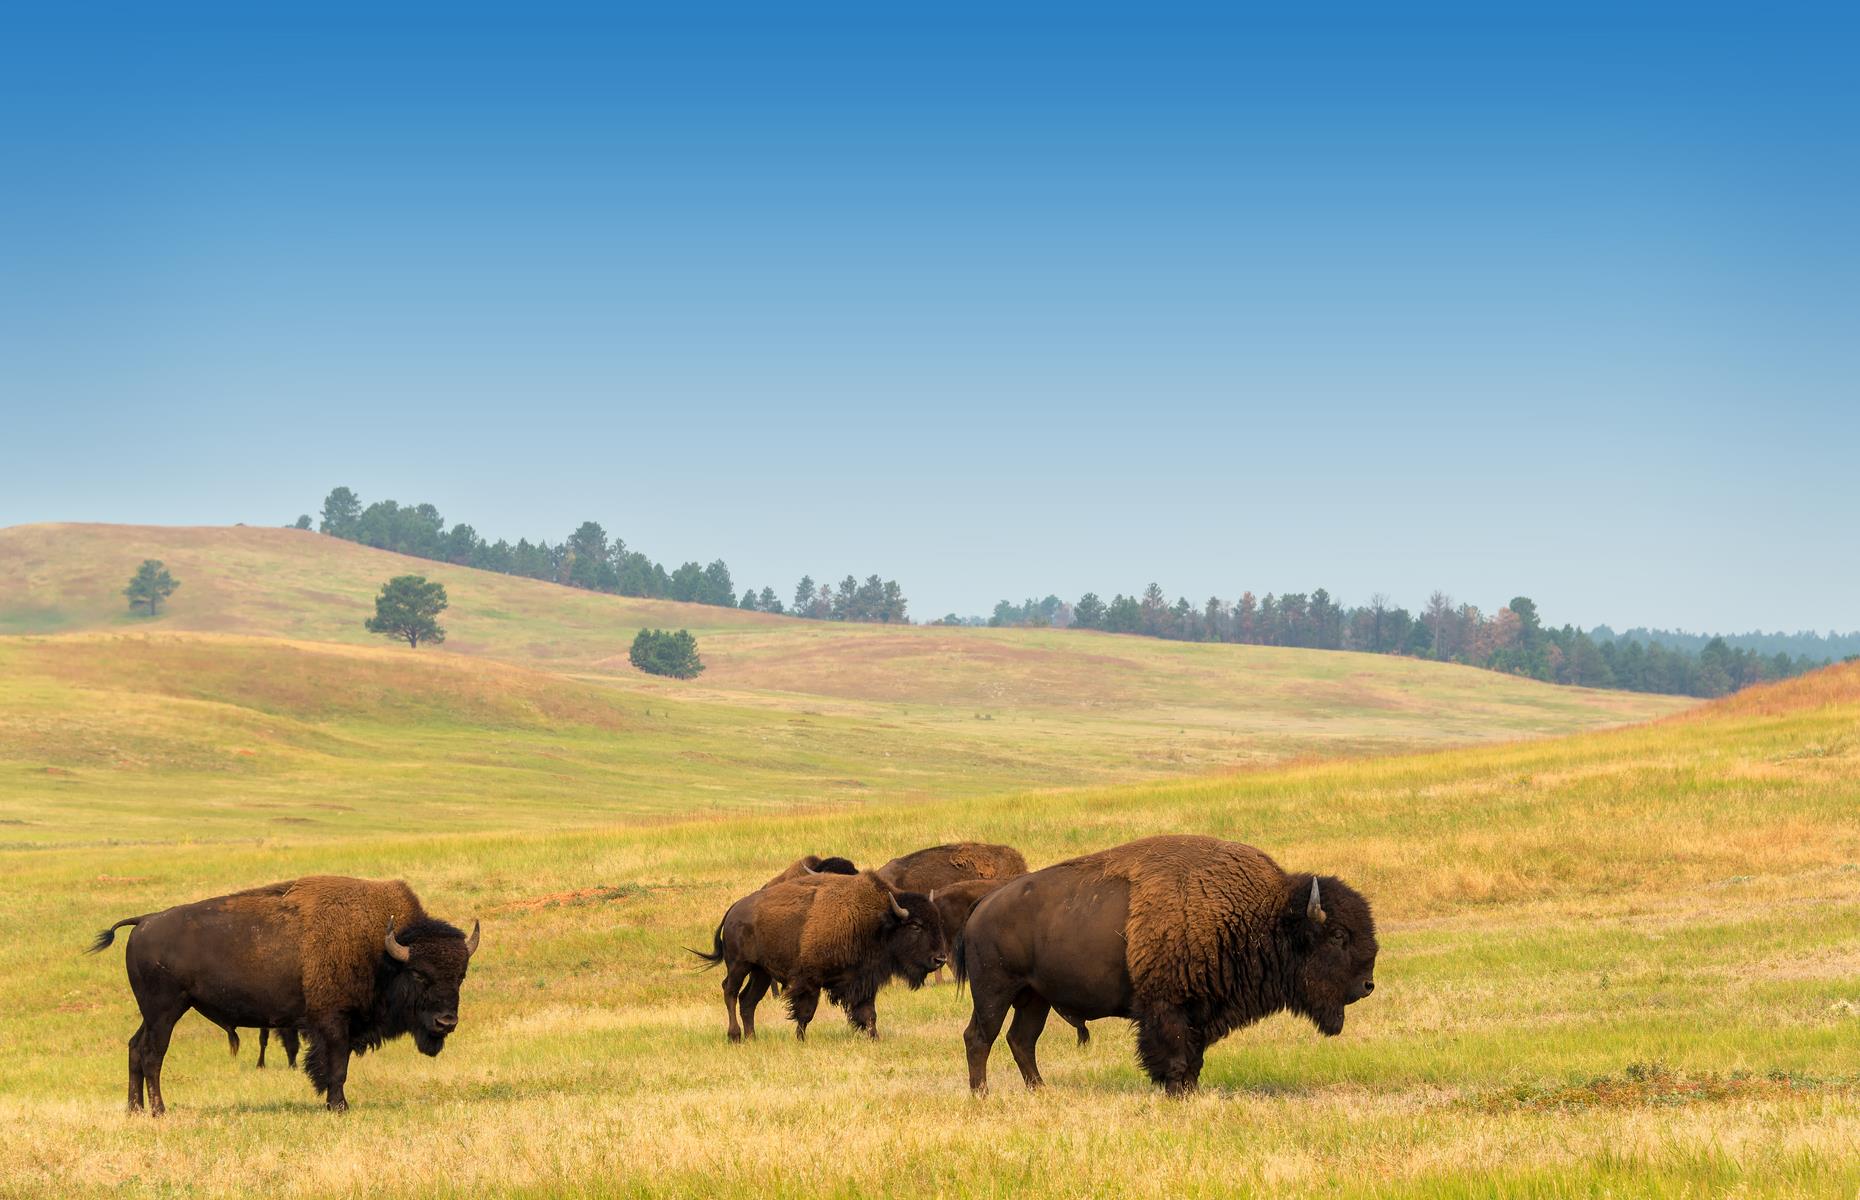 <p>The Black Hills and Badlands area is one of the best places to see American bison or buffalo, with huge herds grazing the prairies and grasslands. See herds munching at the base of Bear Butte or drive the 18-mile (29km) Wildlife Loop in Custer State Park, home to around 1,300 of the hairy, humpbacked creatures. Go in late September to witness the thundering spectacle of the herds being <a href="https://www.blackhillsbadlands.com/special-events/custer-state-park-buffalo-roundup-arts-festival">rounded up</a>.</p>